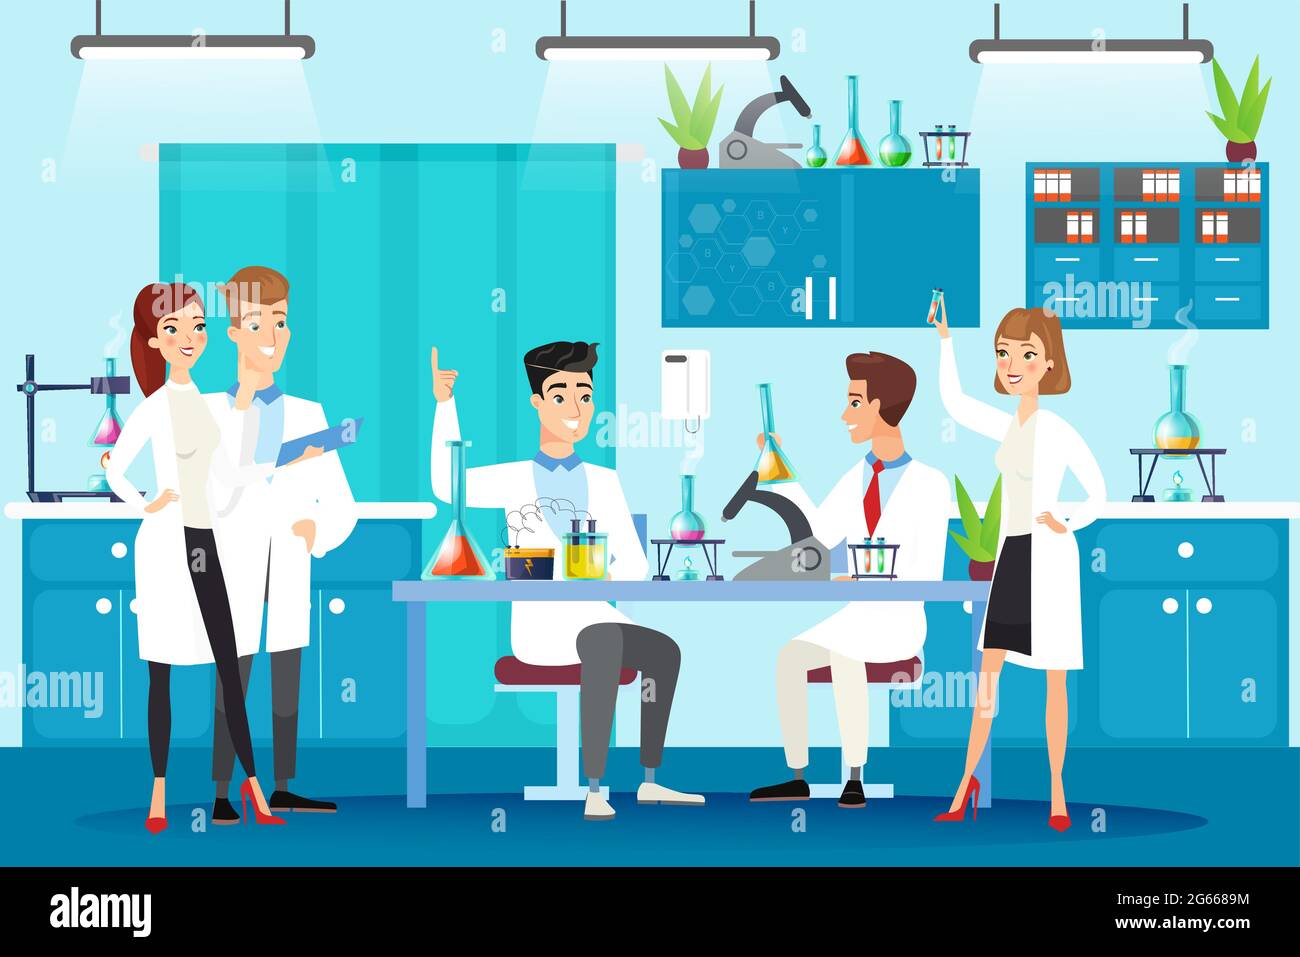 Scientific laboratory flat vector illustration. Chemical lab experiment, study, research. People in white gowns, scientists at workplace working Stock Vector